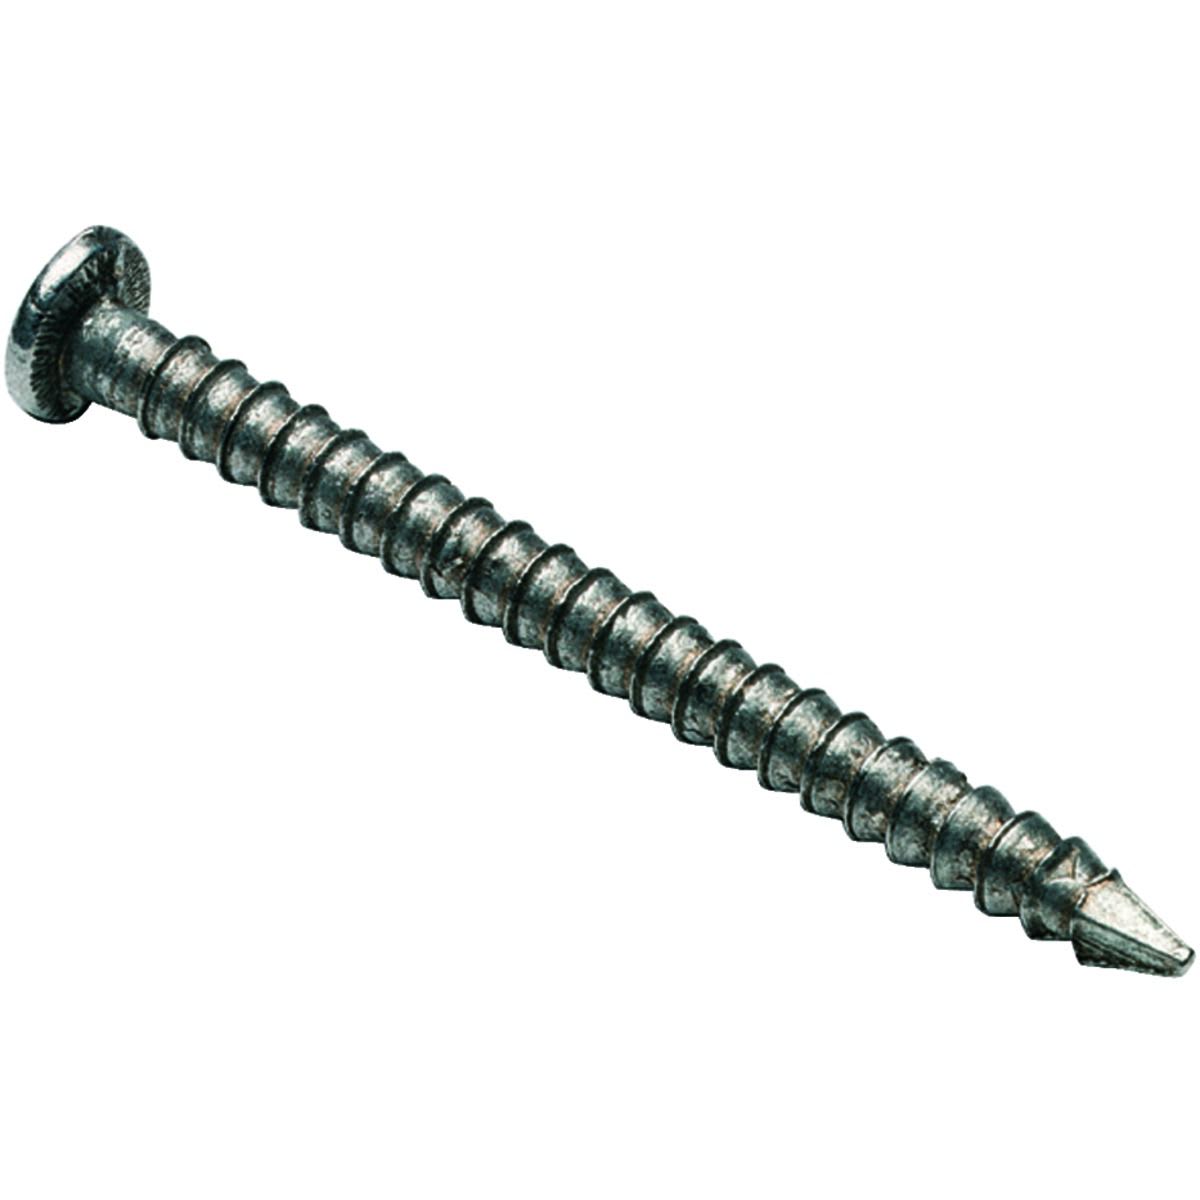 Wickes 40mm Bright Annular Extra Grip Nails -